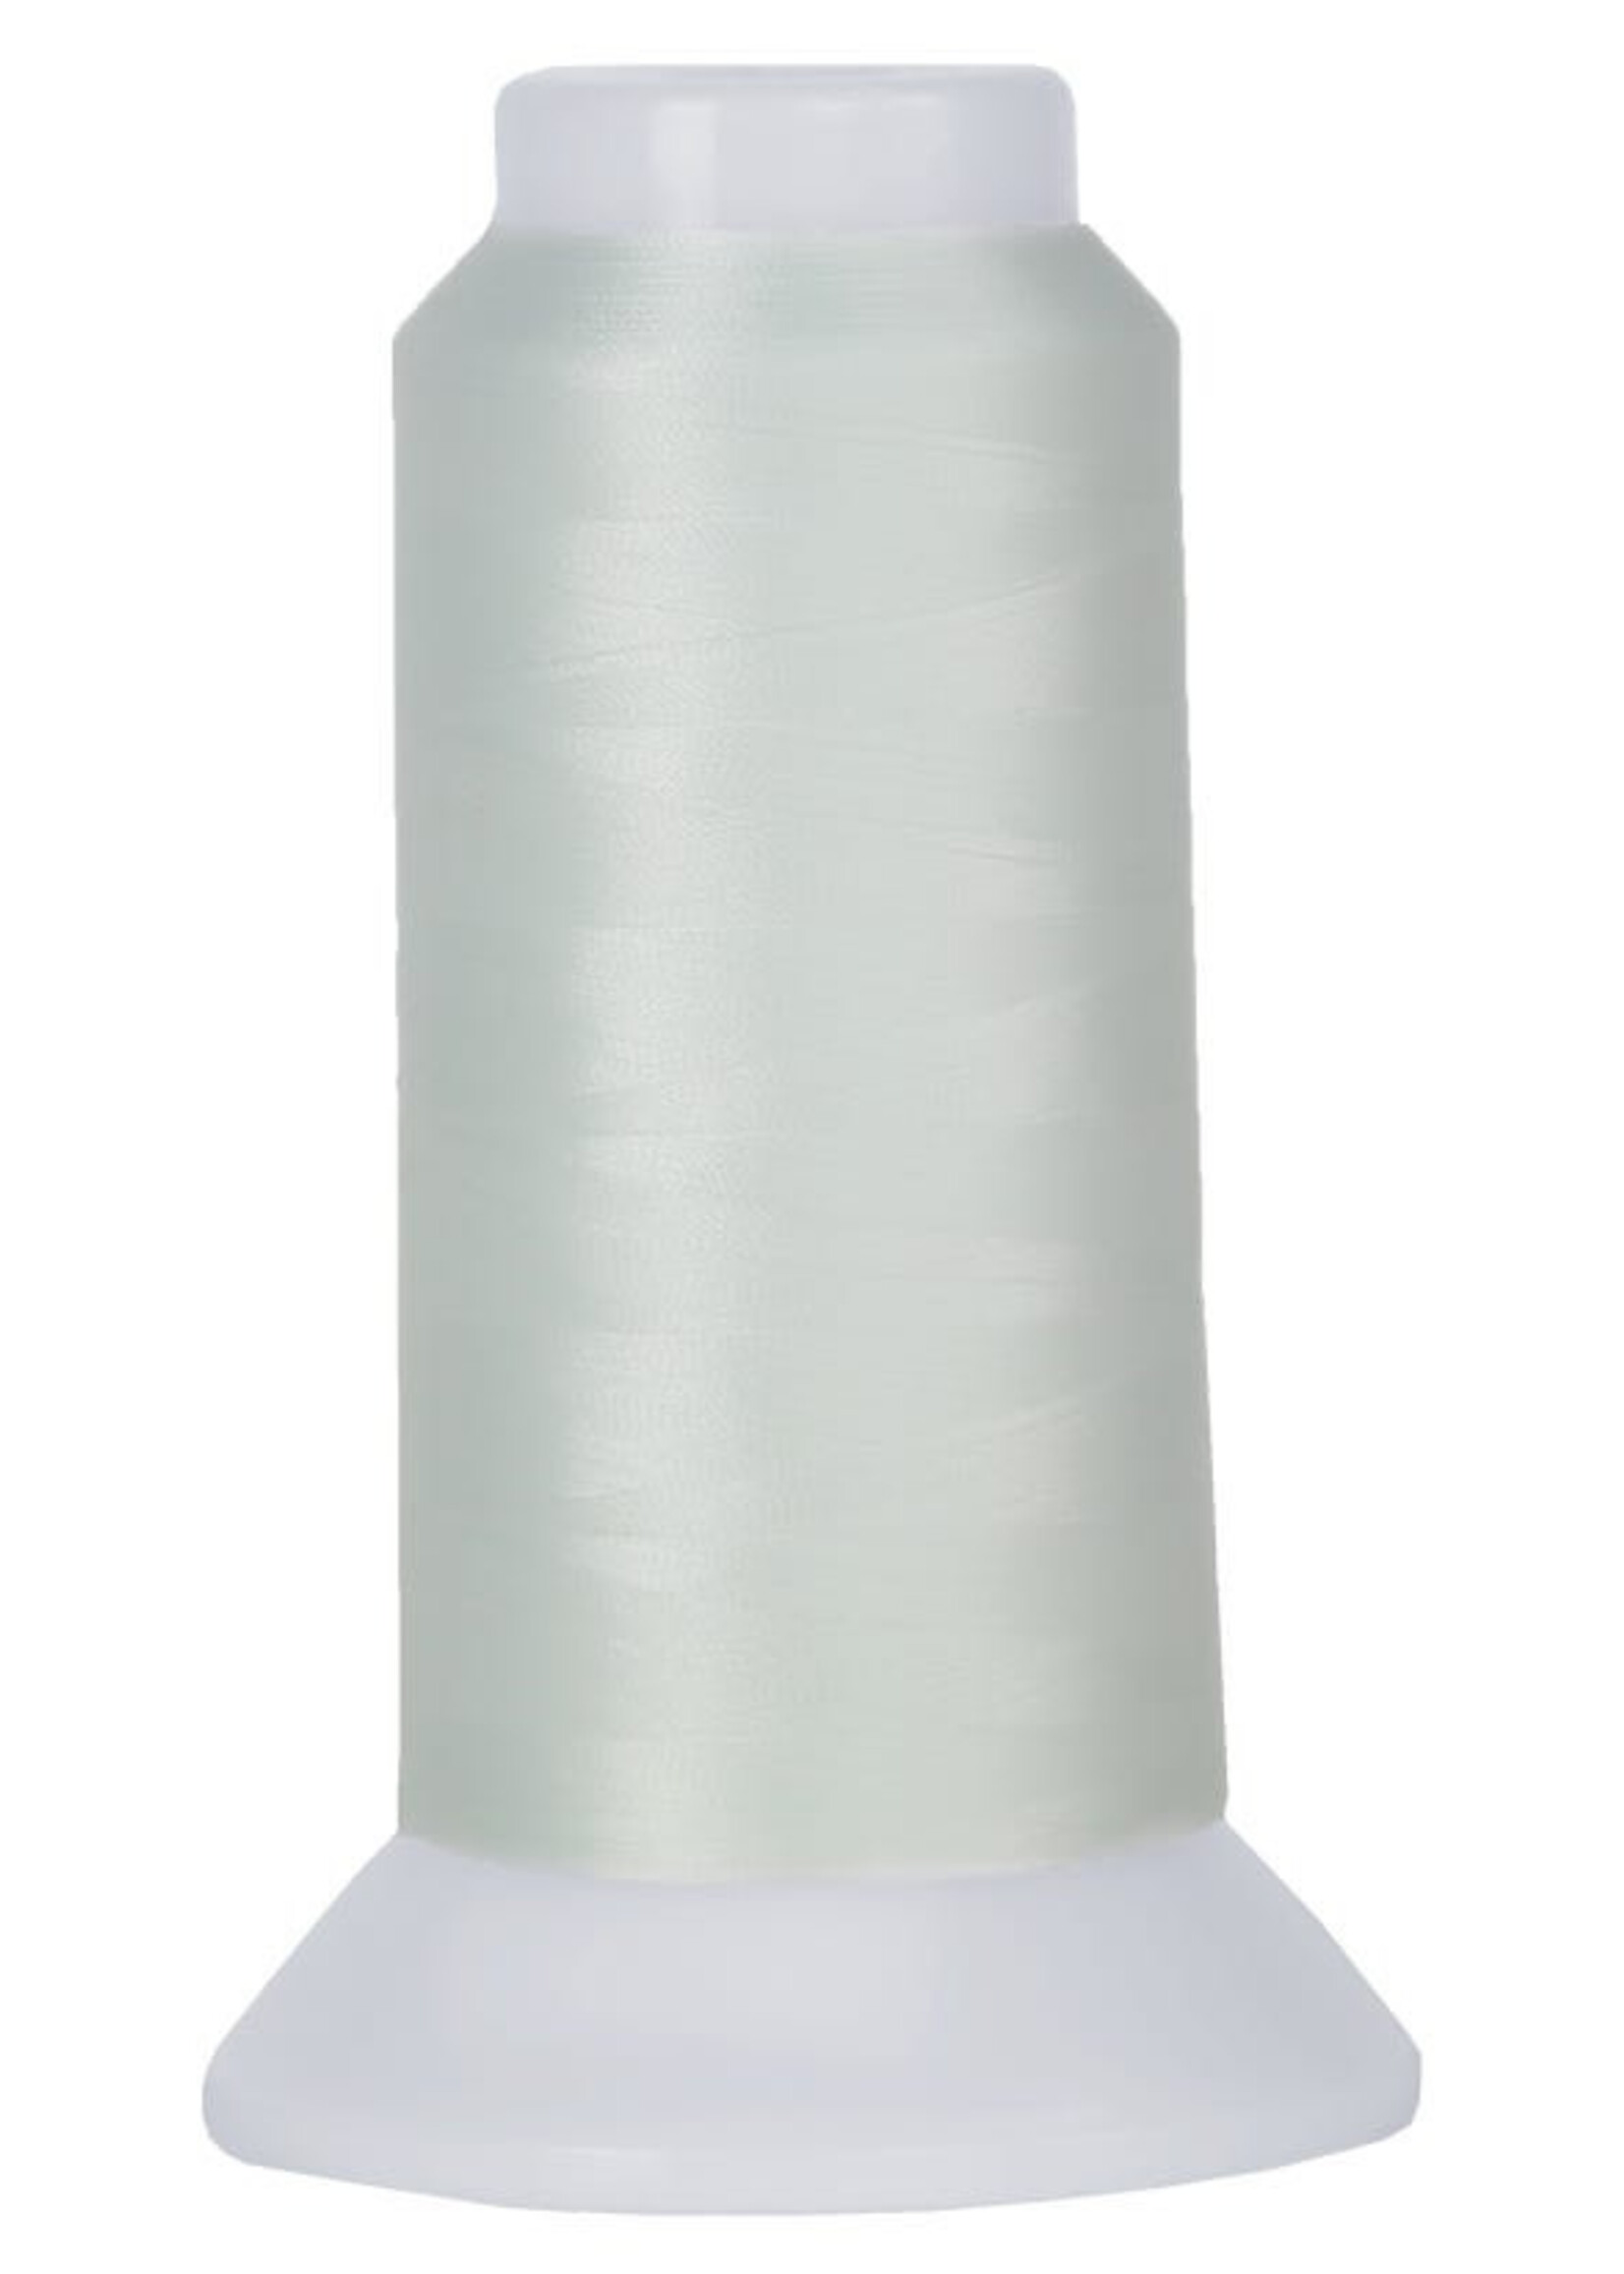 Superior Threads MicroQuilter 3,000 yd cone 100Wt. 7002 Lace White